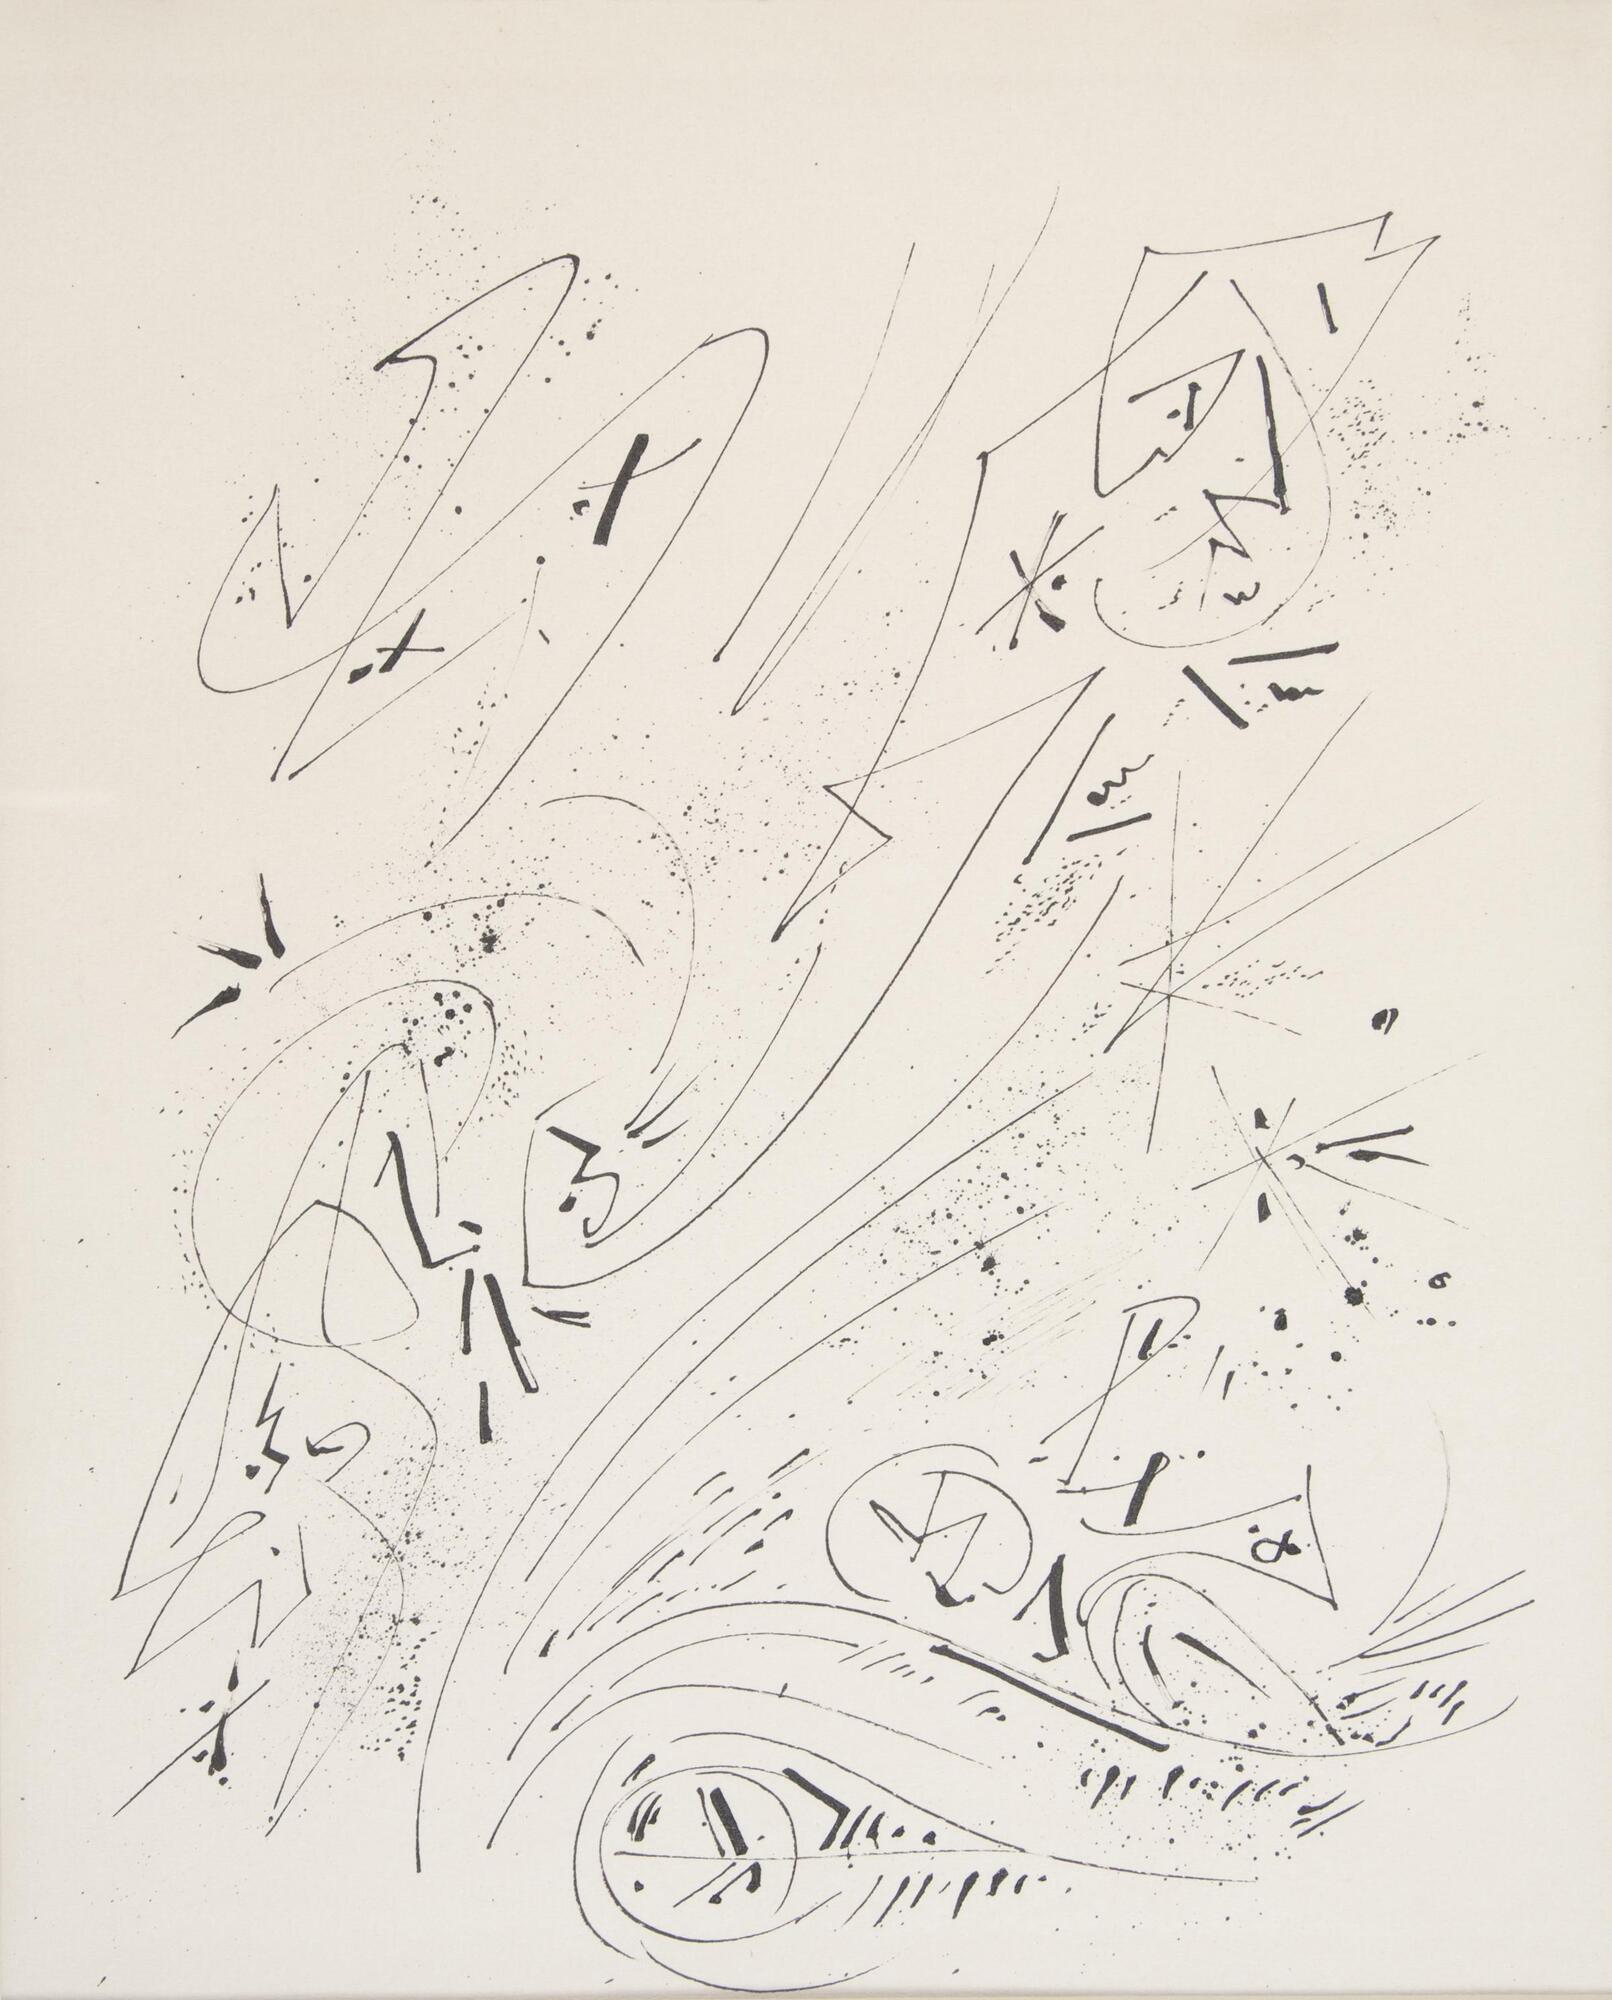 An abstract drawing with lines, swirling forms, and ink splatterings.